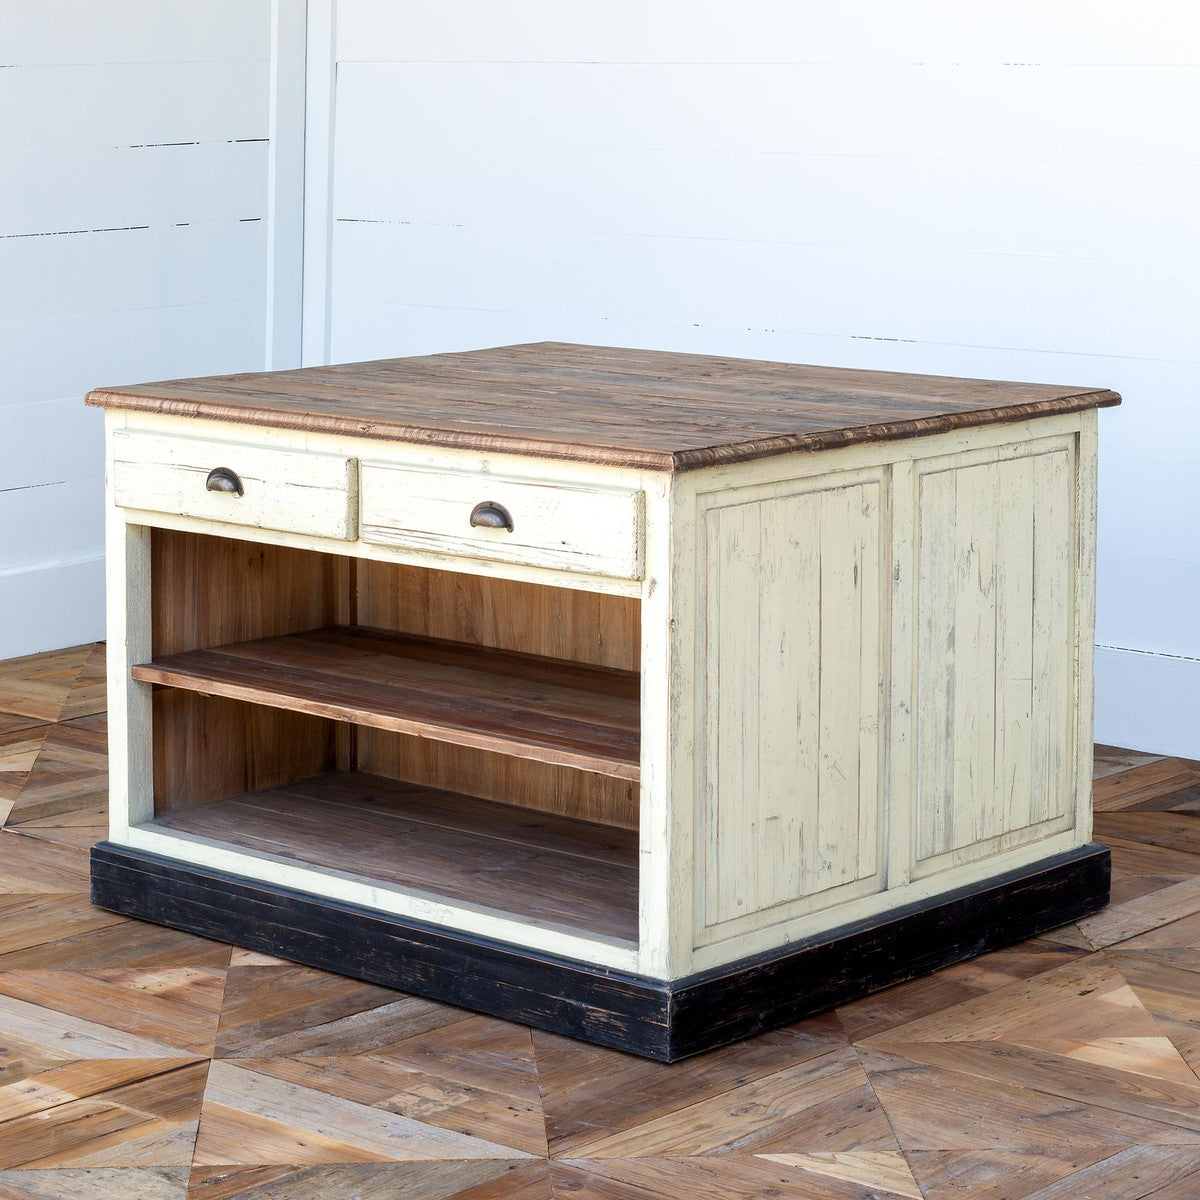 two-sided worktable with drawers